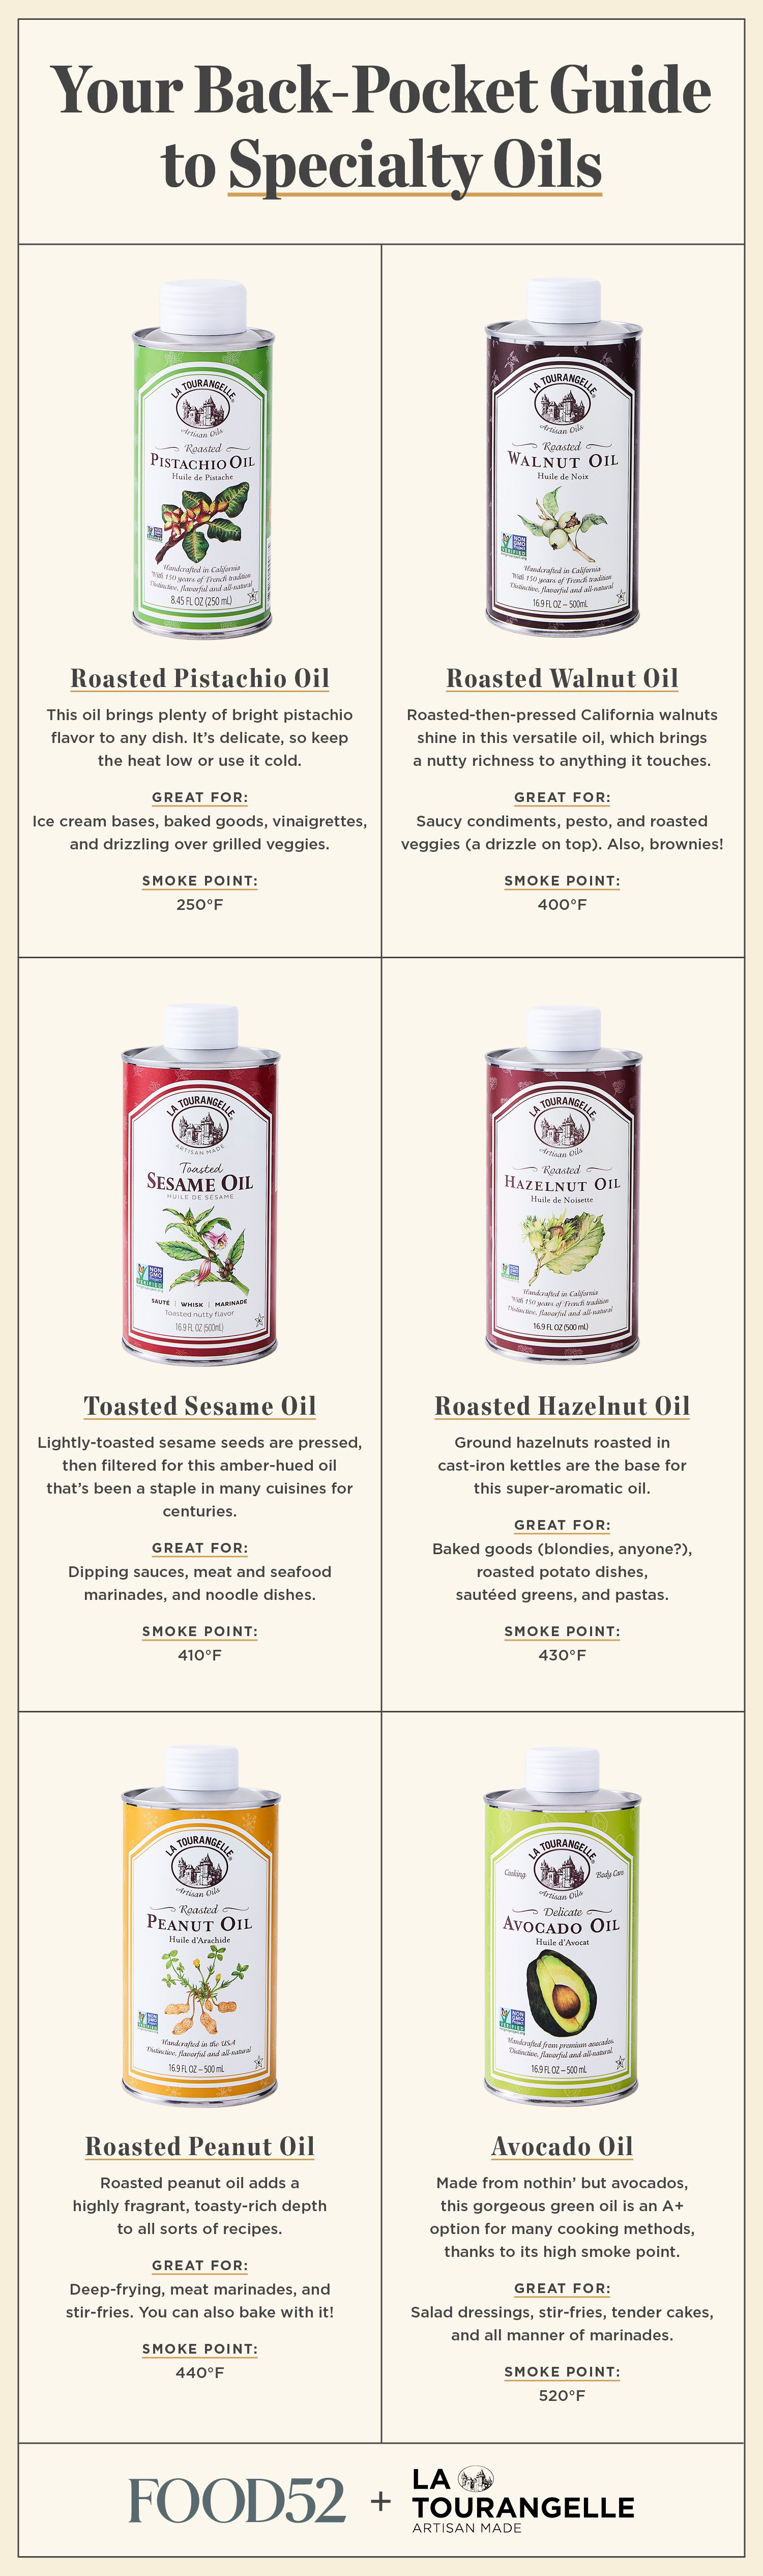 From Walnut to Avocado, Here Are 6 Specialty Oils to Add to Your Pantry